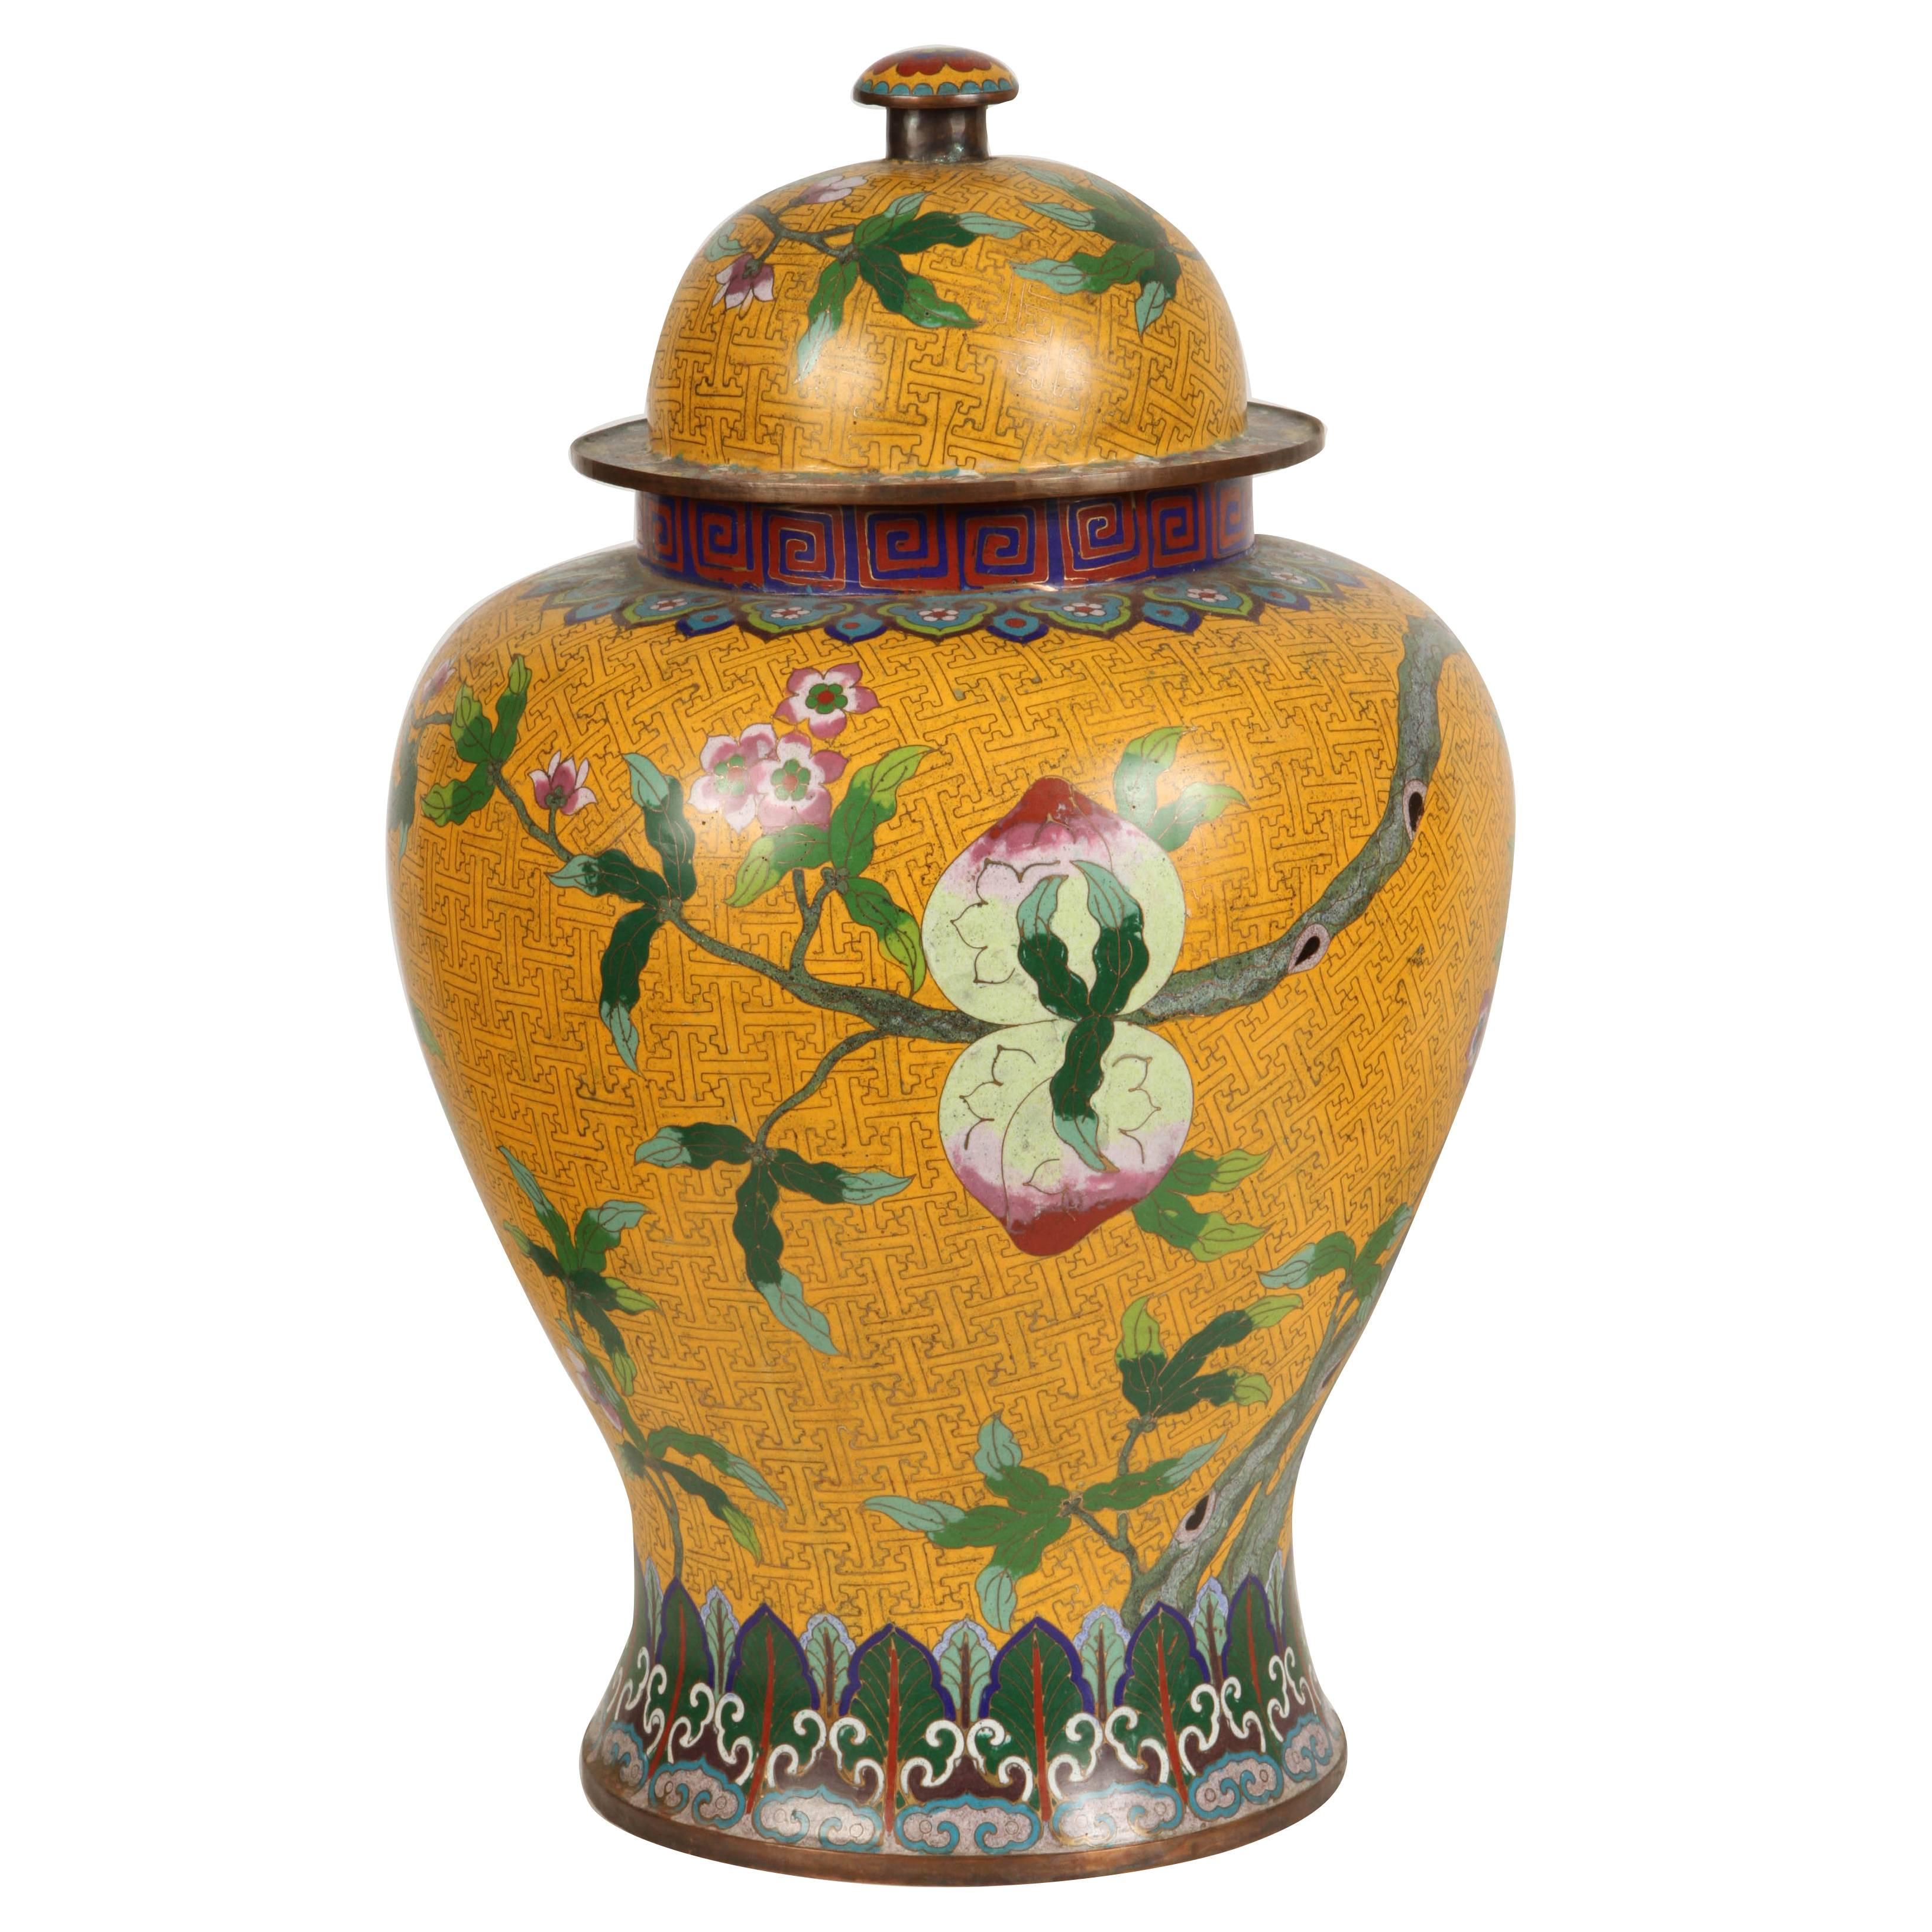 A Yellow Cloisonne Temple Jar with Peaches 